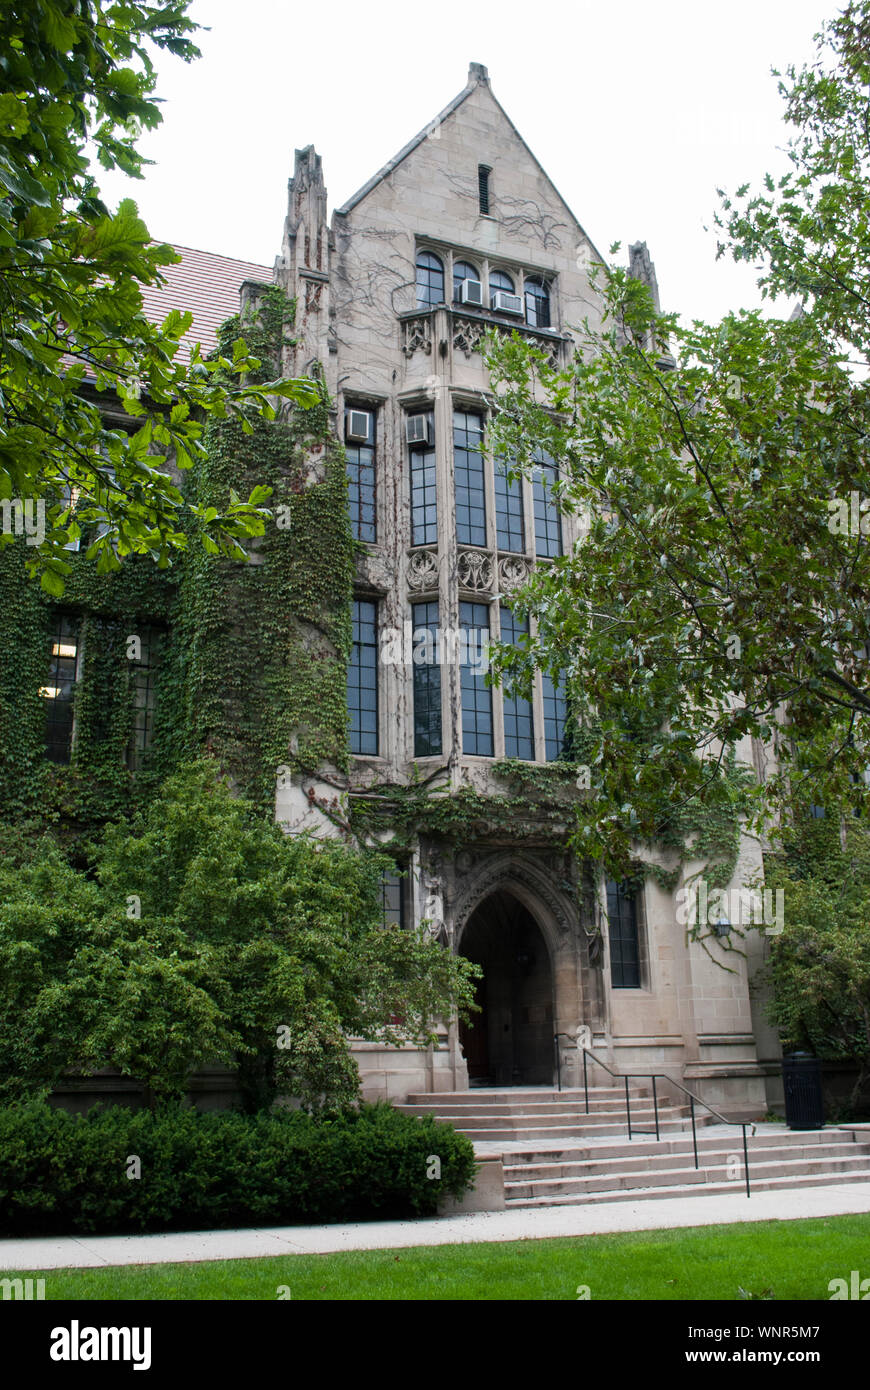 American universities. University of Chicago. English Gothic style of architecture Stock Photo